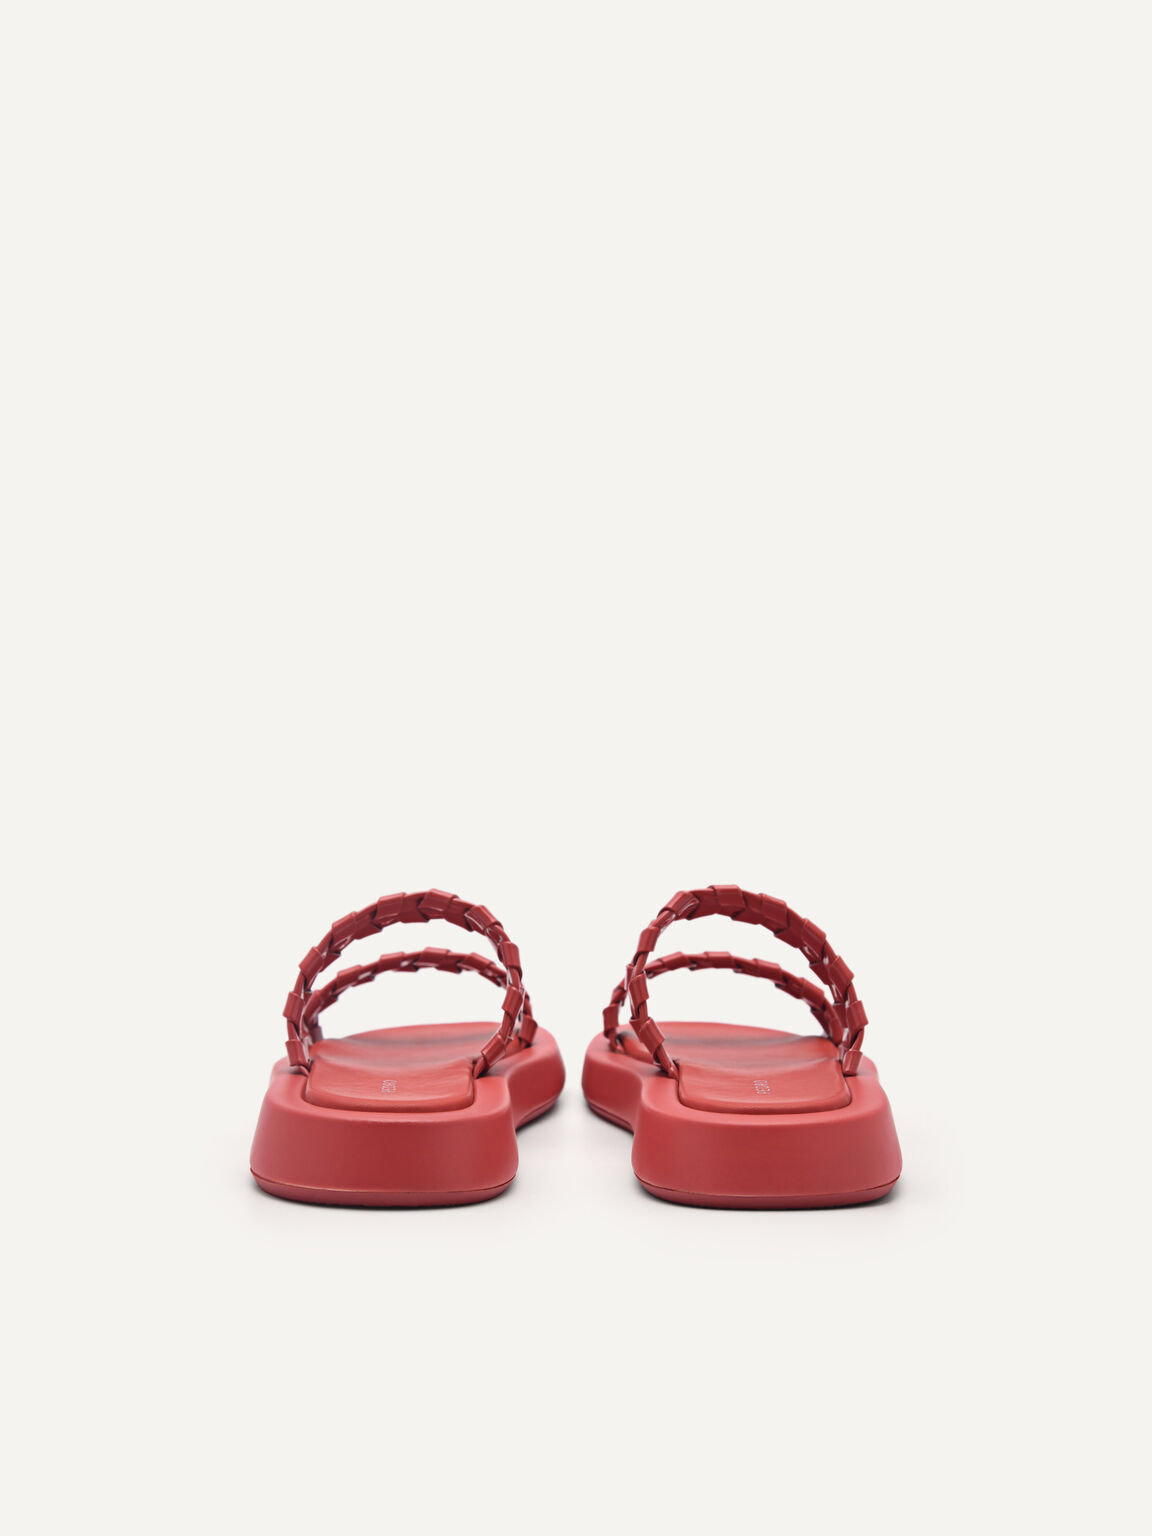 Palma Woven Sandals, Red